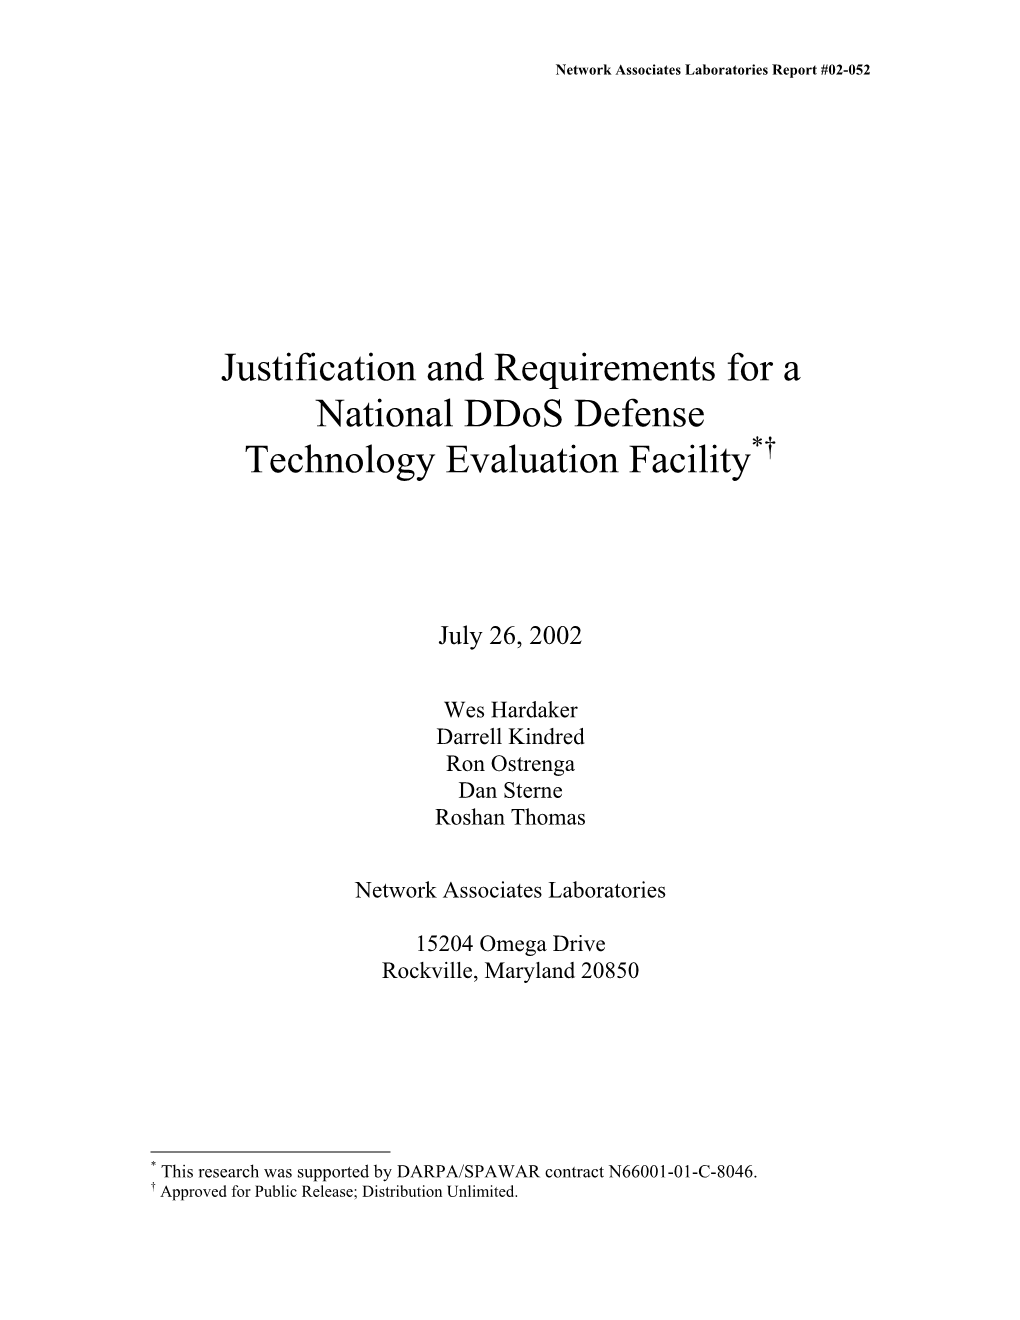 Justifications and Requirements for a National Ddos Defense Technology Evaluation Facility